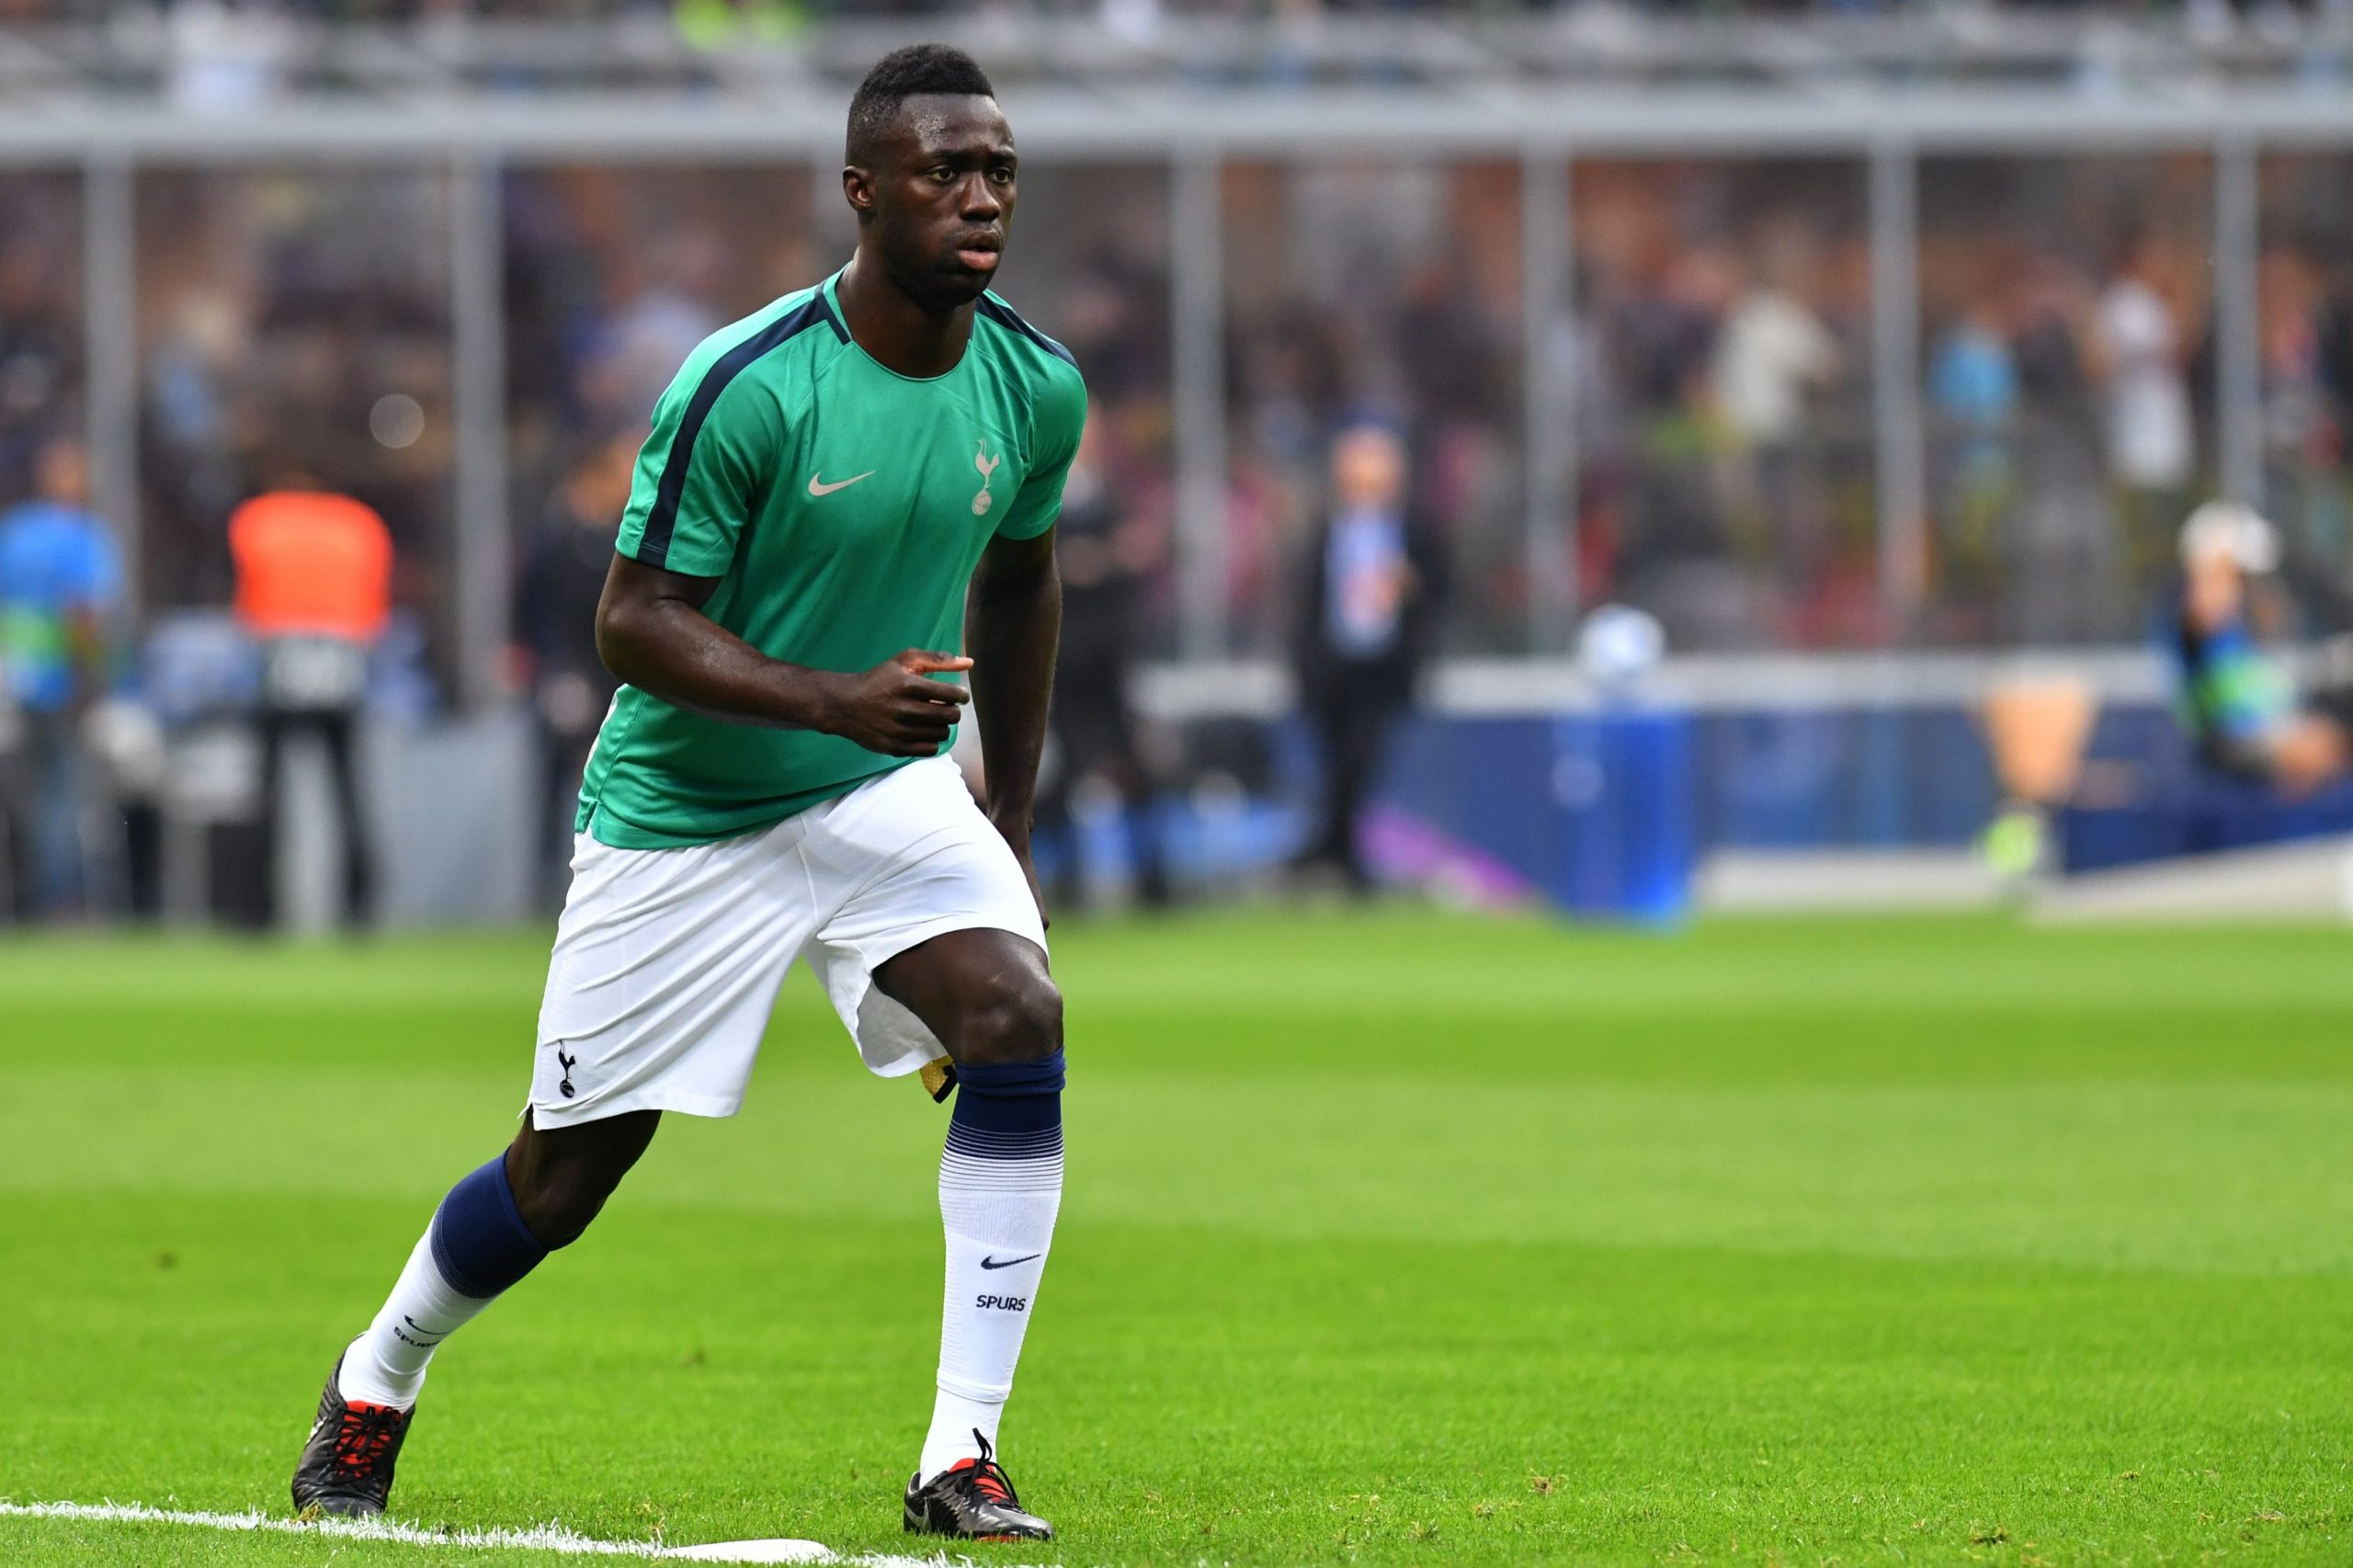 Davinson Sanchez warms up prior to the UEFA Champions League group stage football match against Inter Milan.